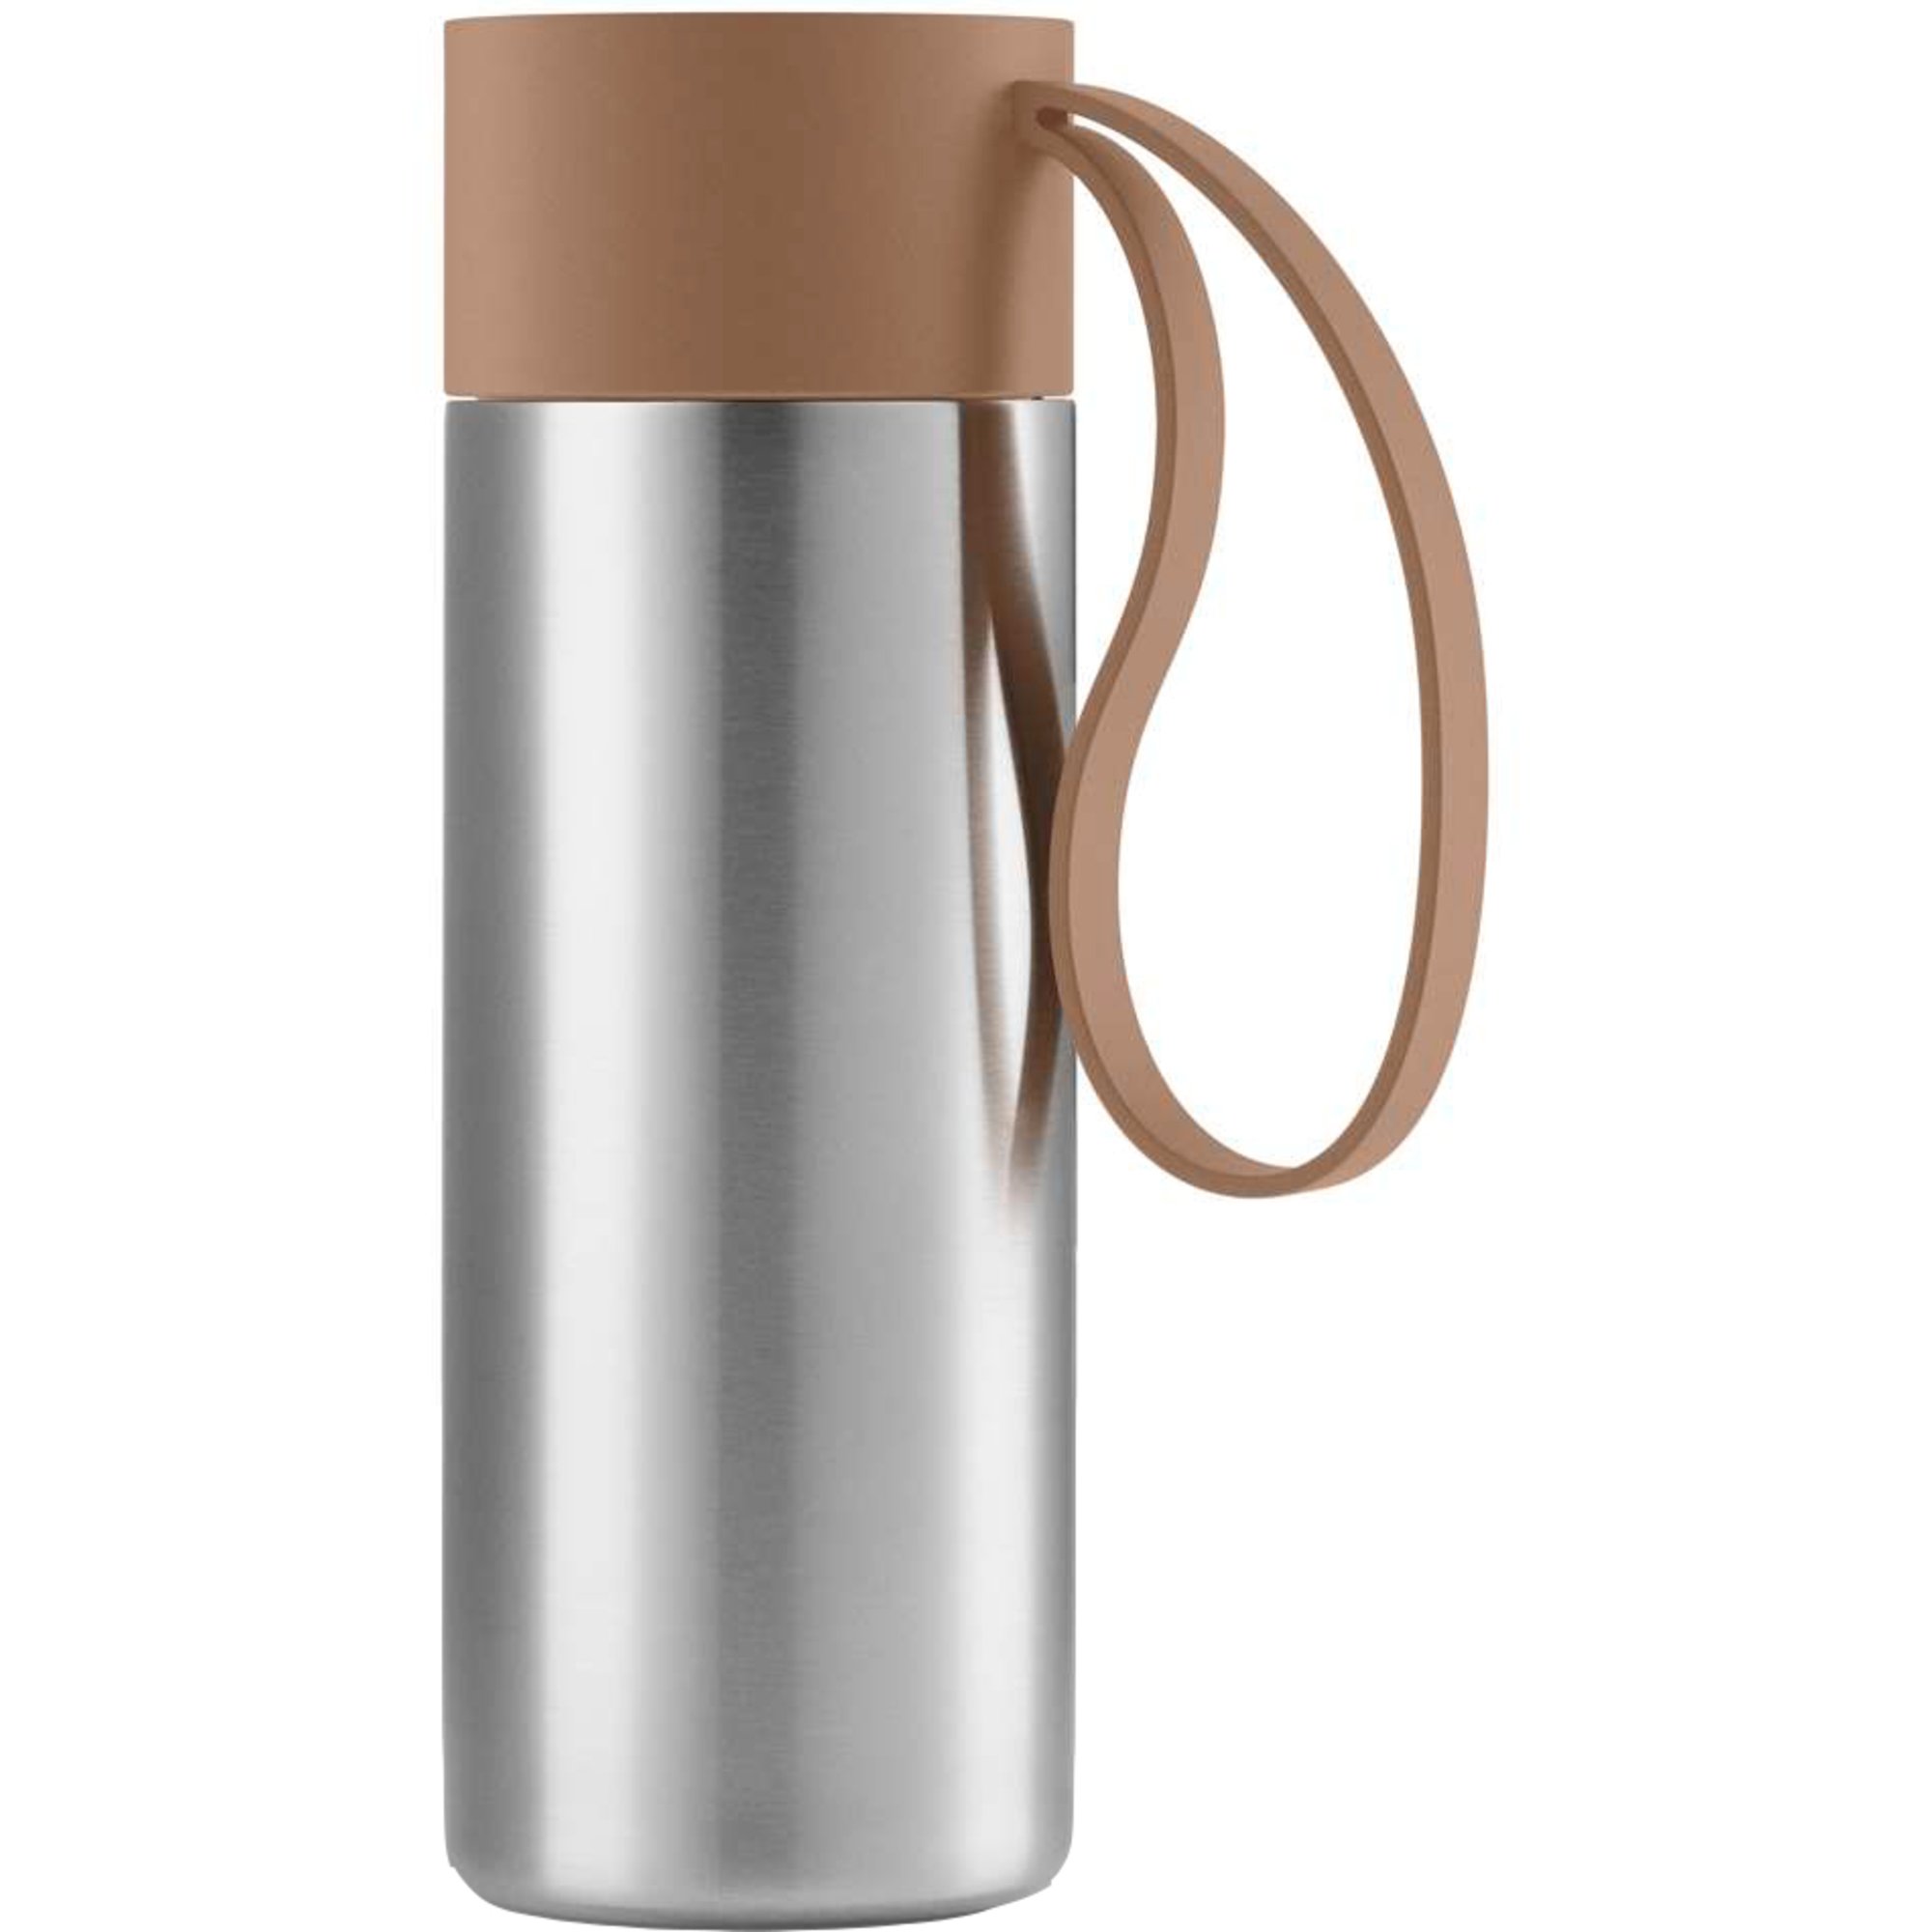 Eva Solo To Go Cup termokrus 0,35 liter, mocca